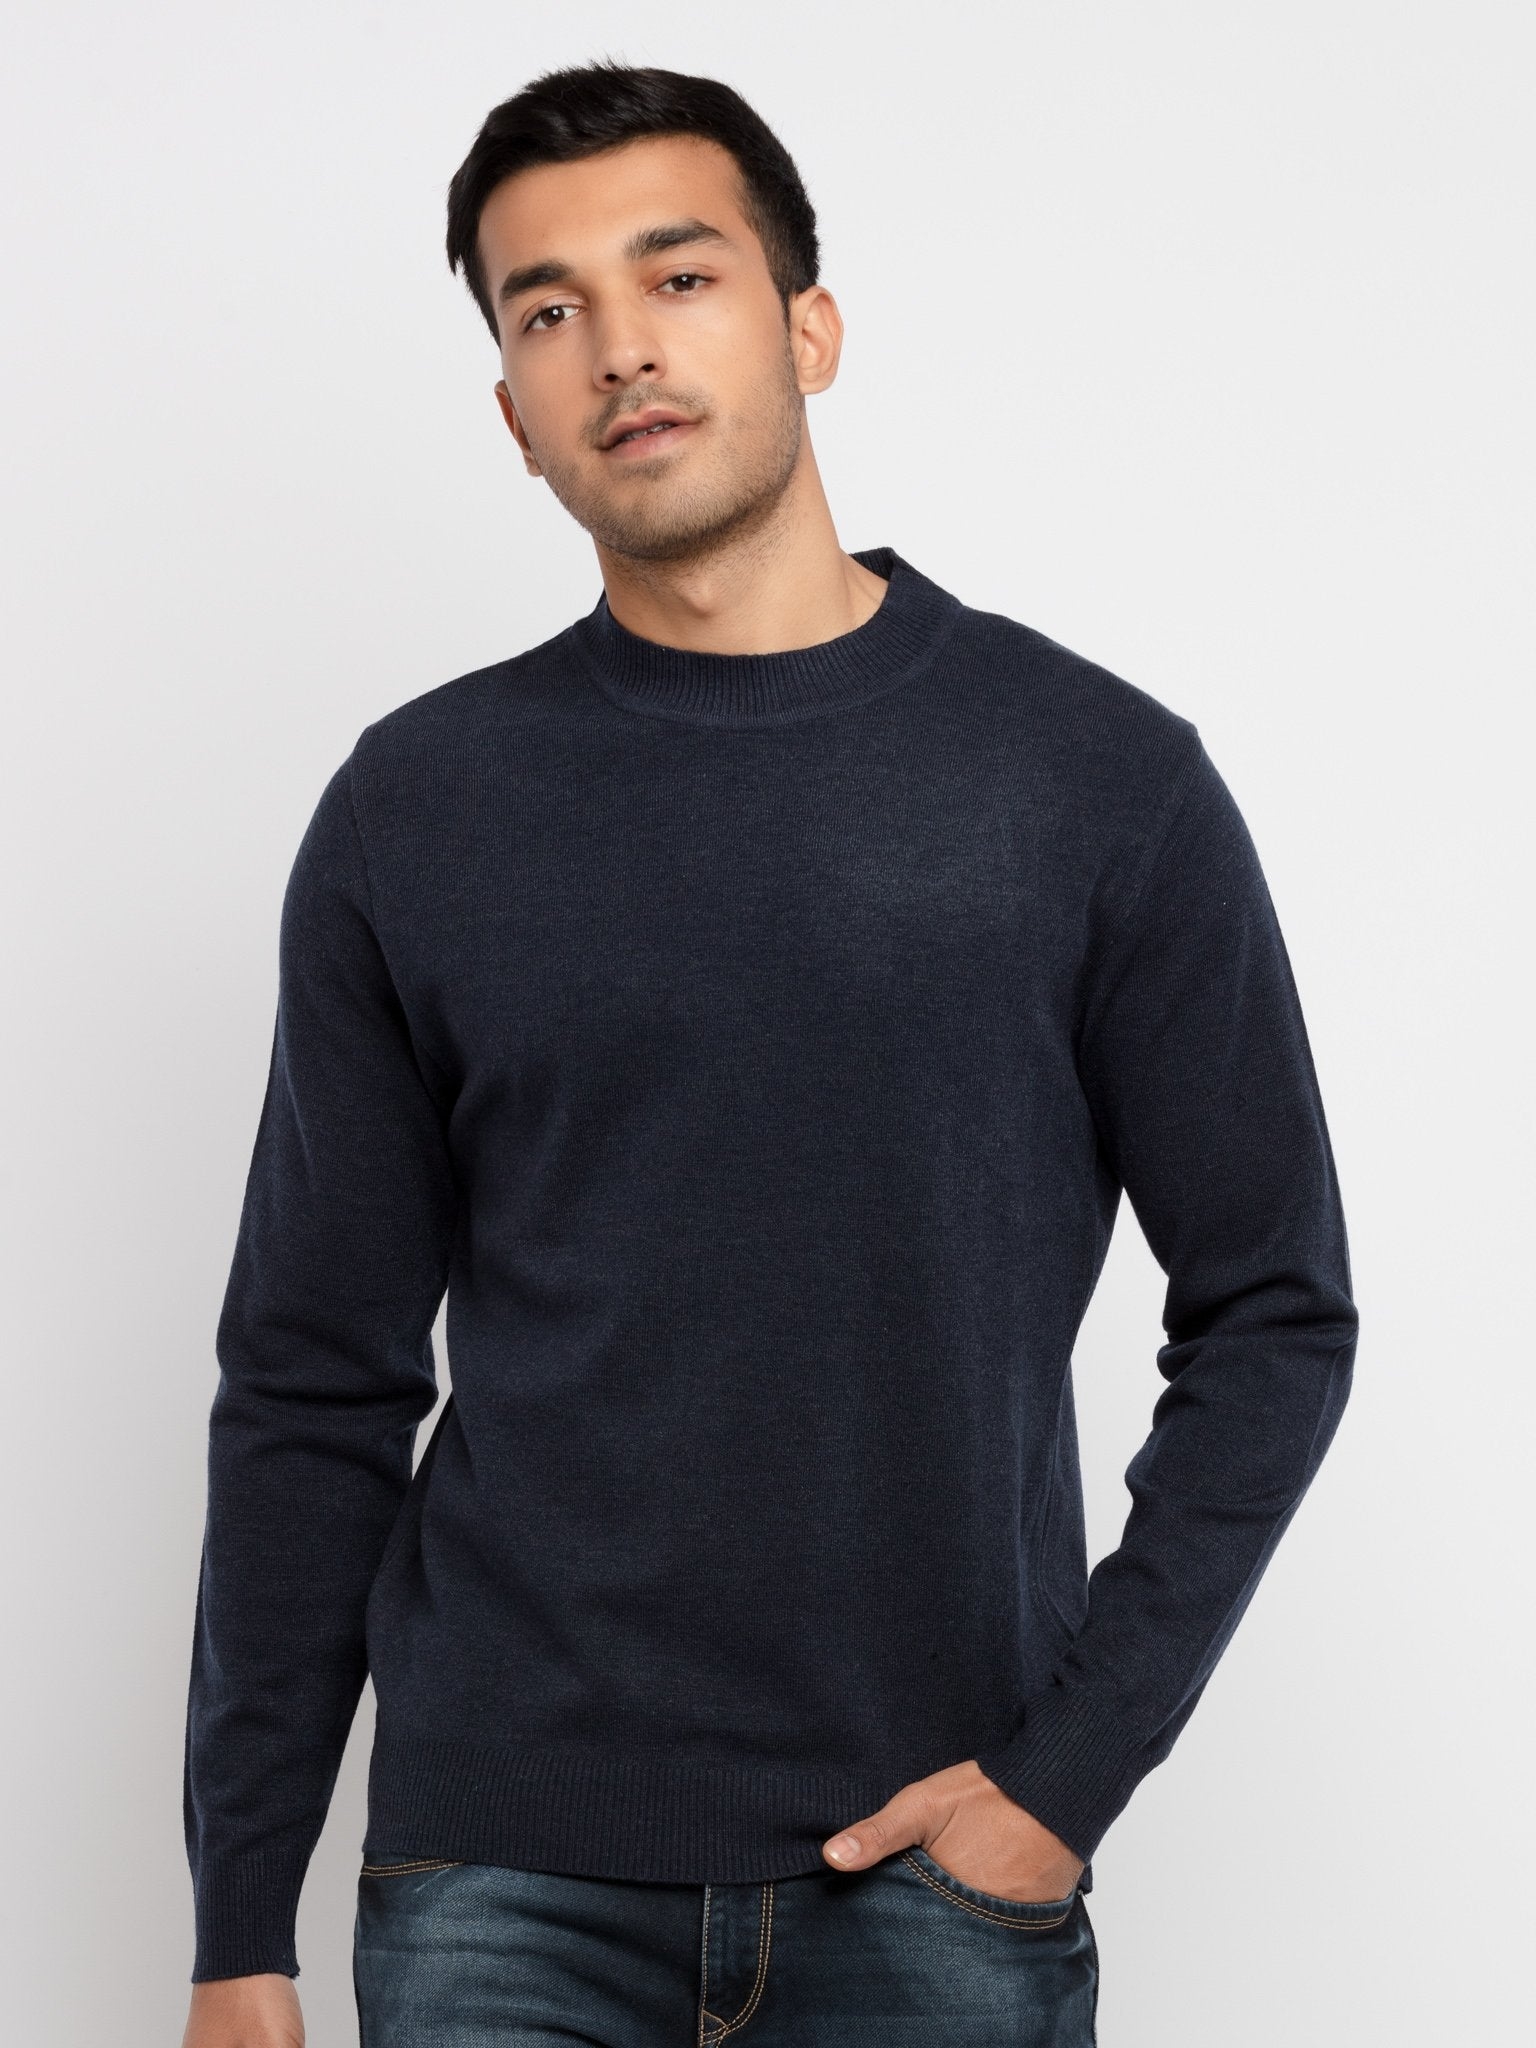 Men's Blue Acrylic Solid Sweaters